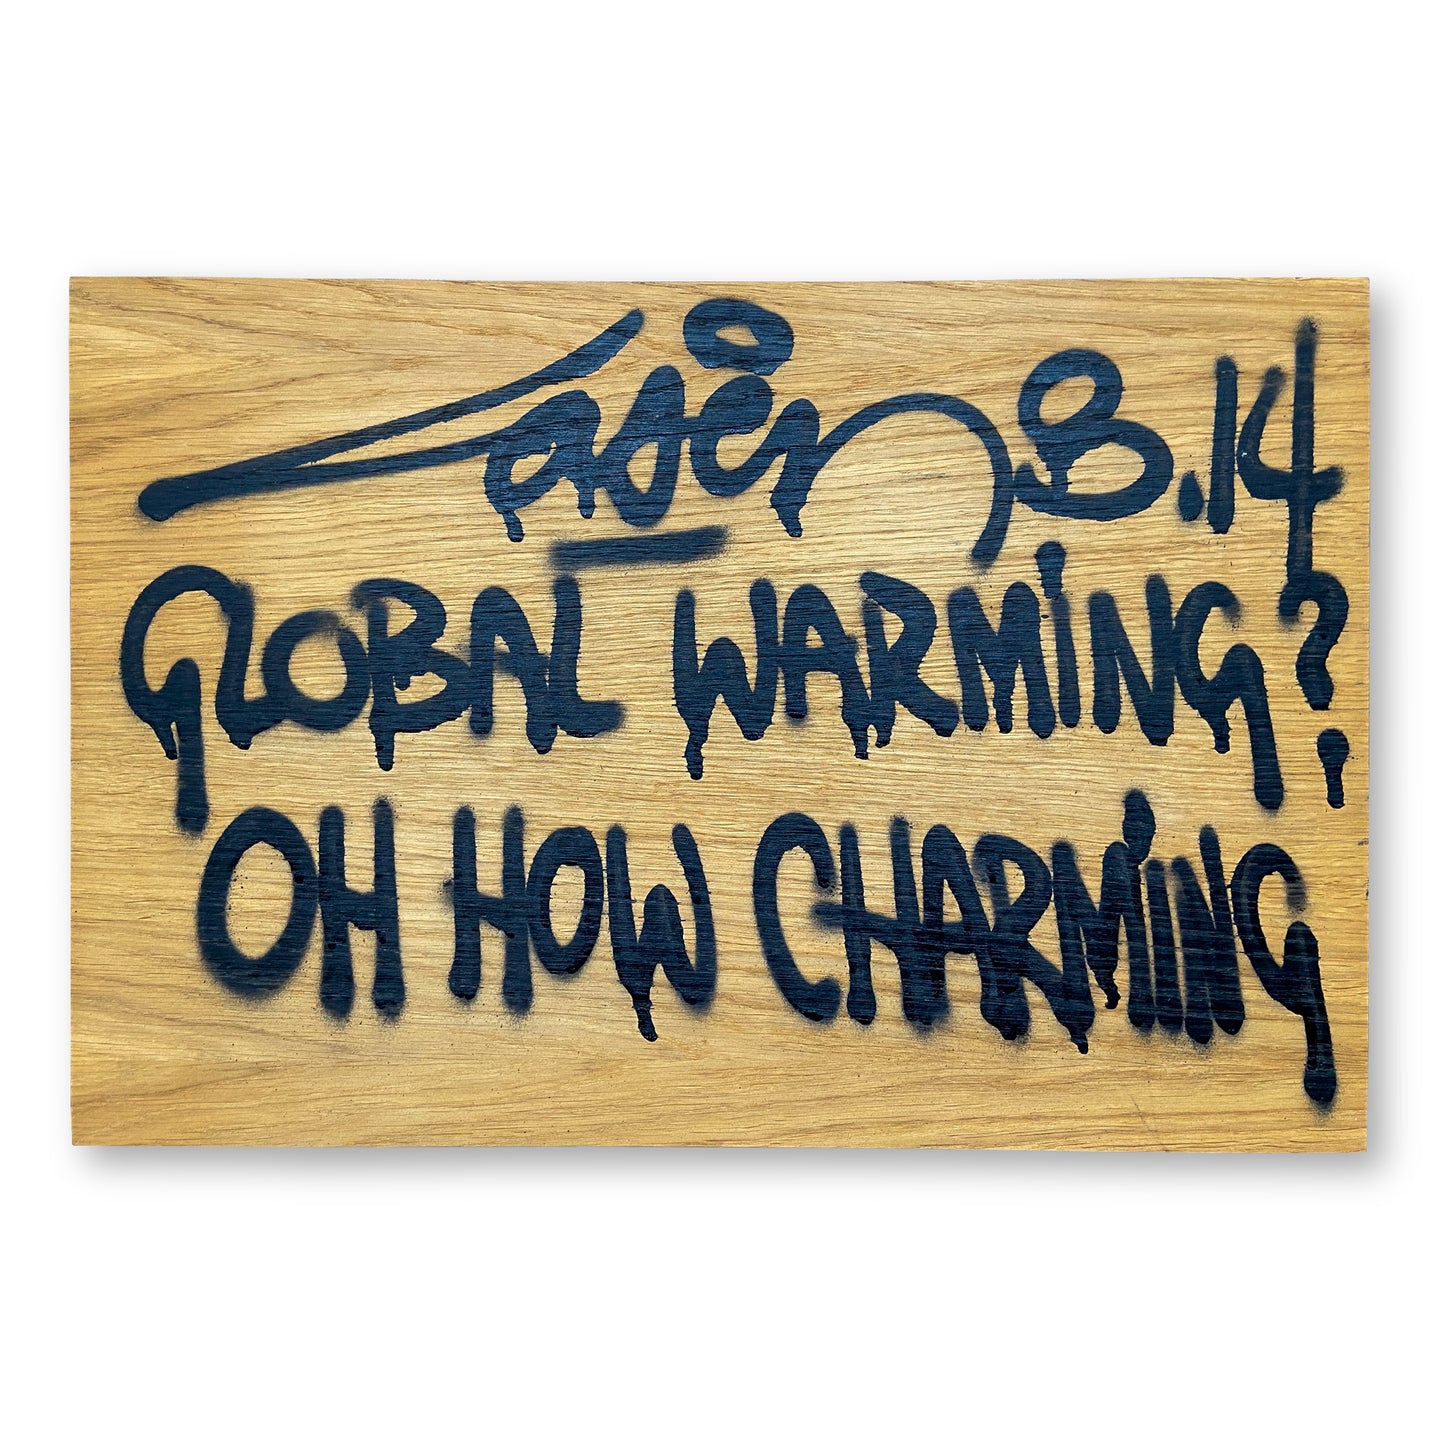 Global Warming? Oh How Charming